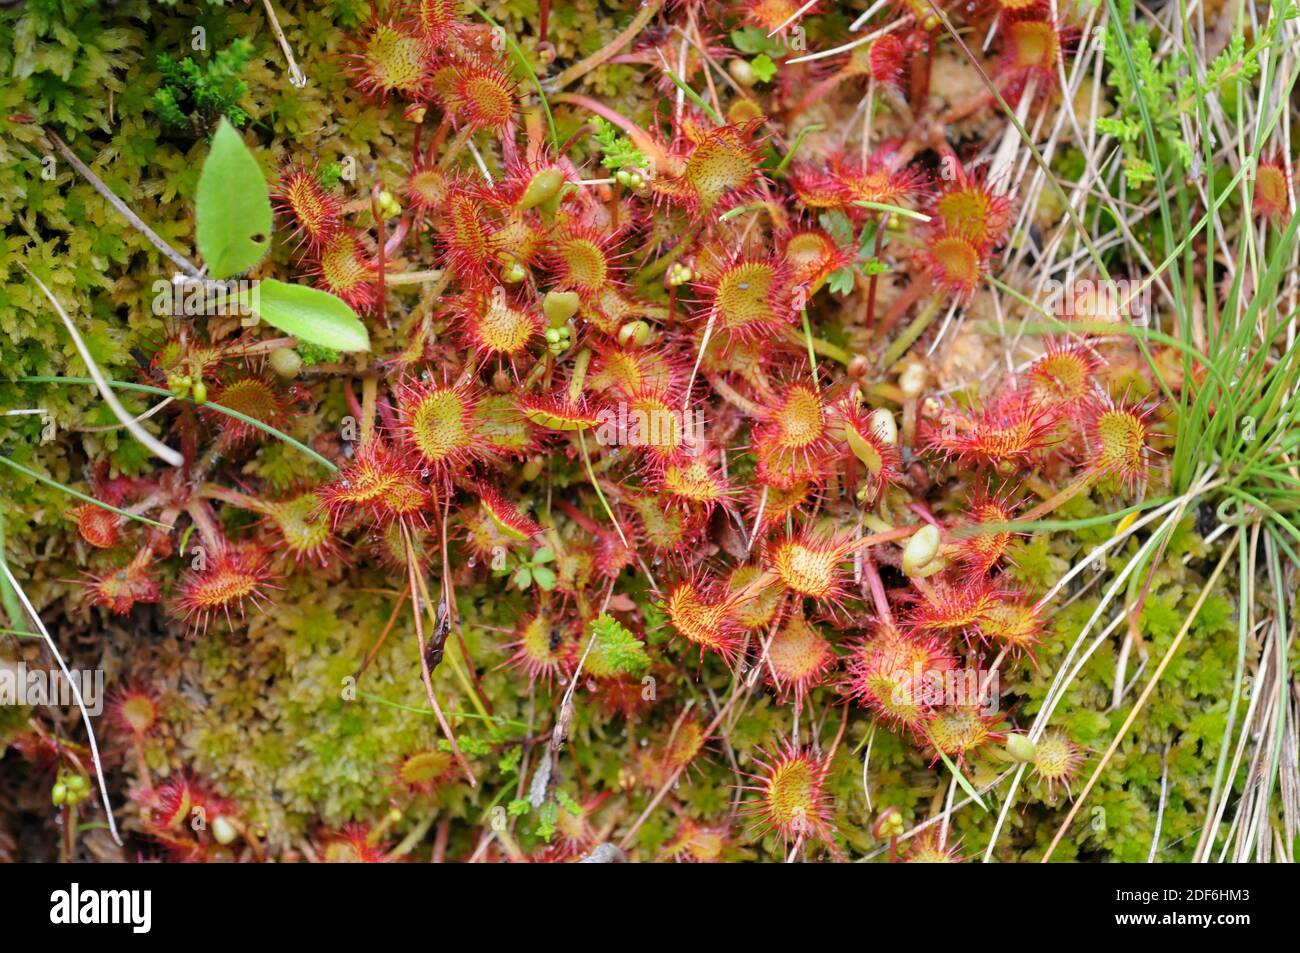 Common sundew or round-leaved sundew (Drosera rotundifolia) is a carnivorous plant with a circumboreal distribution but present in the mountains of Stock Photo